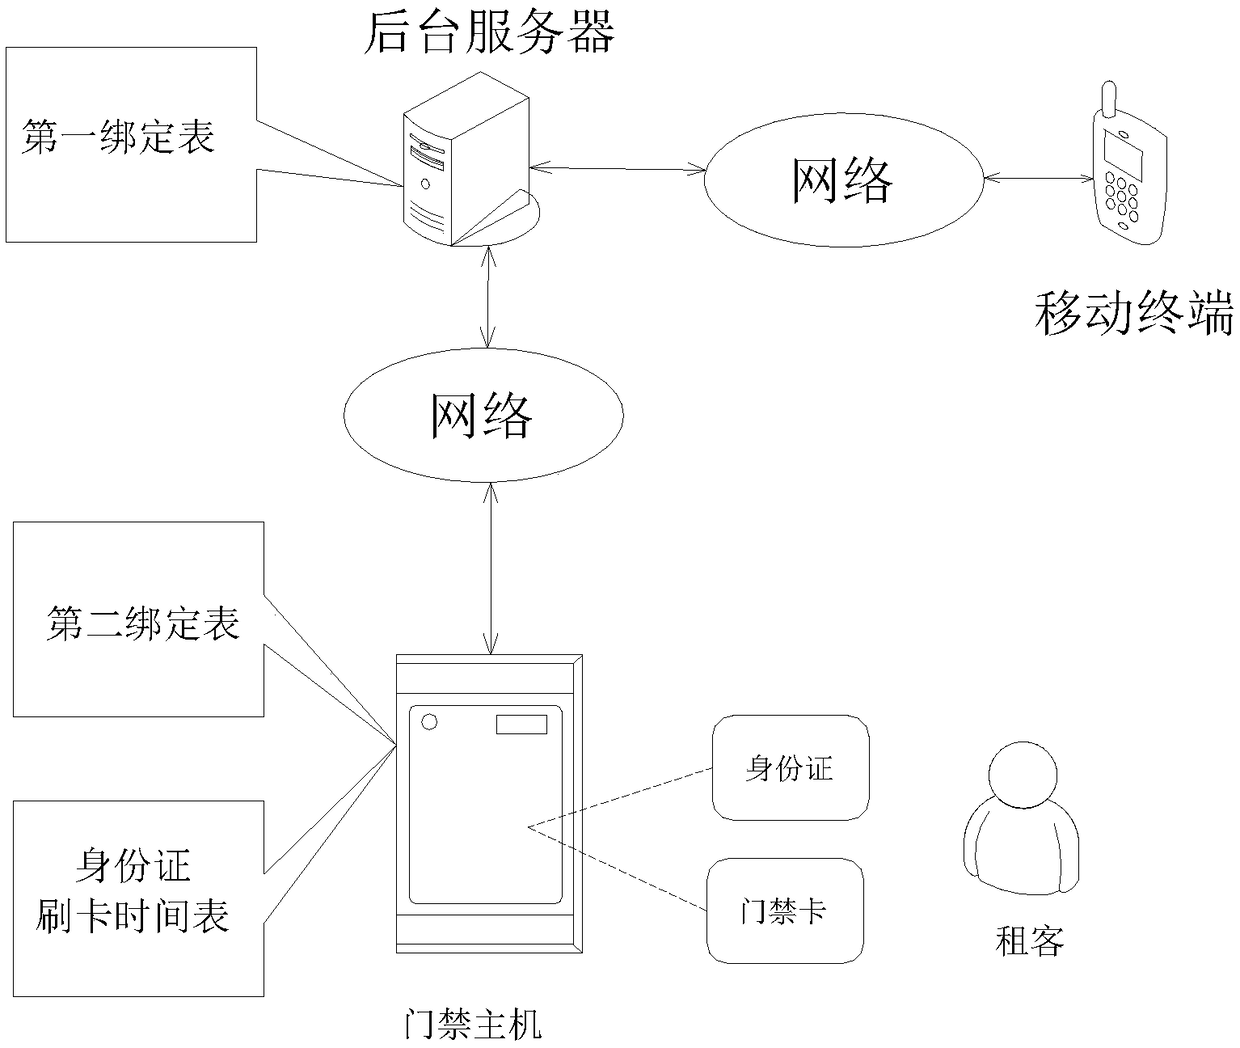 Rent house access control management method utilizing mobile terminal to manage